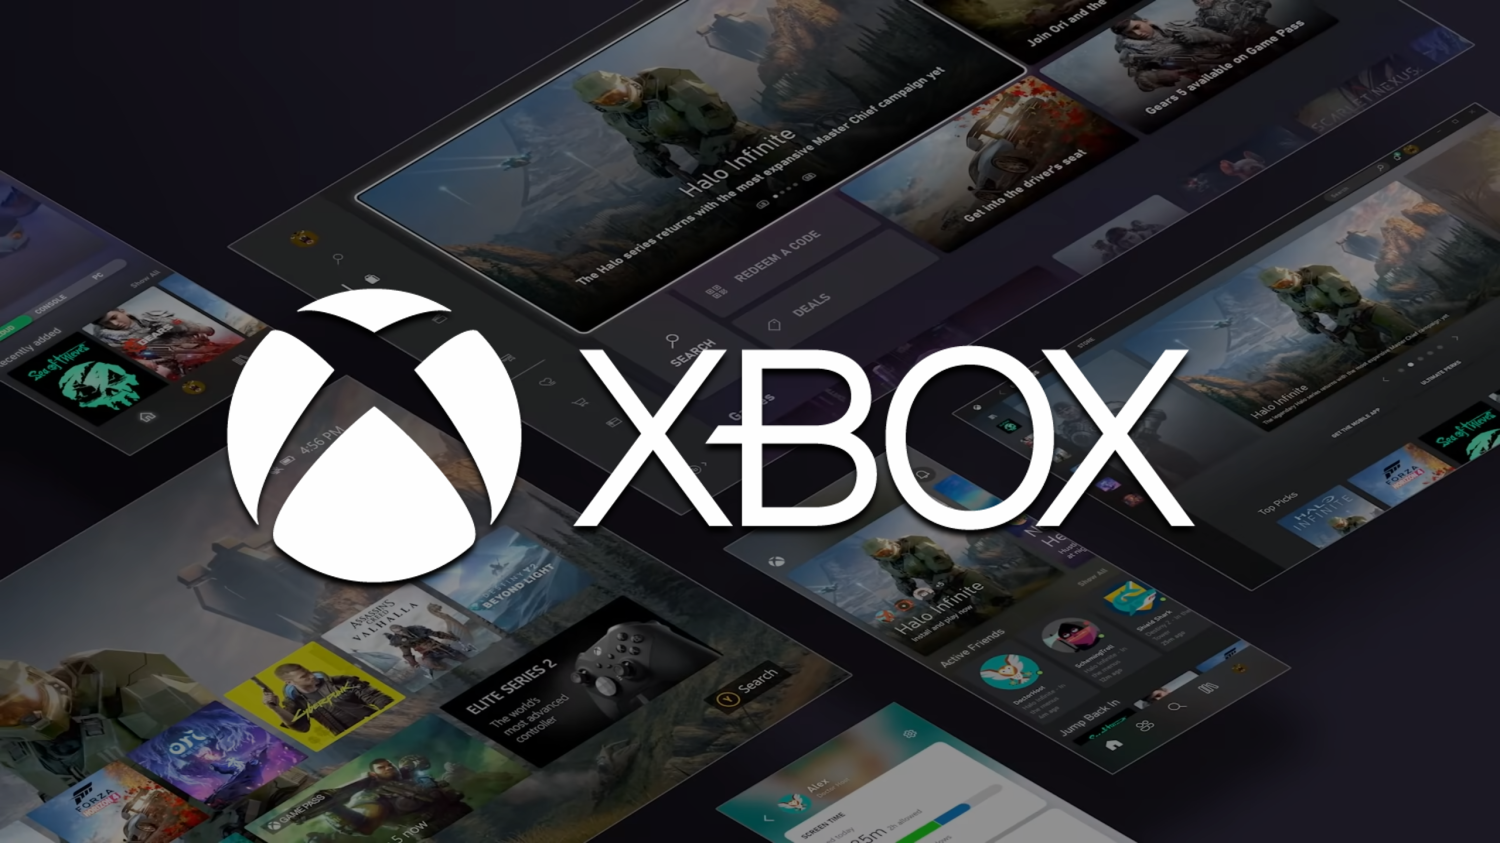 Articles about Xbox Game Pass – GeekWire